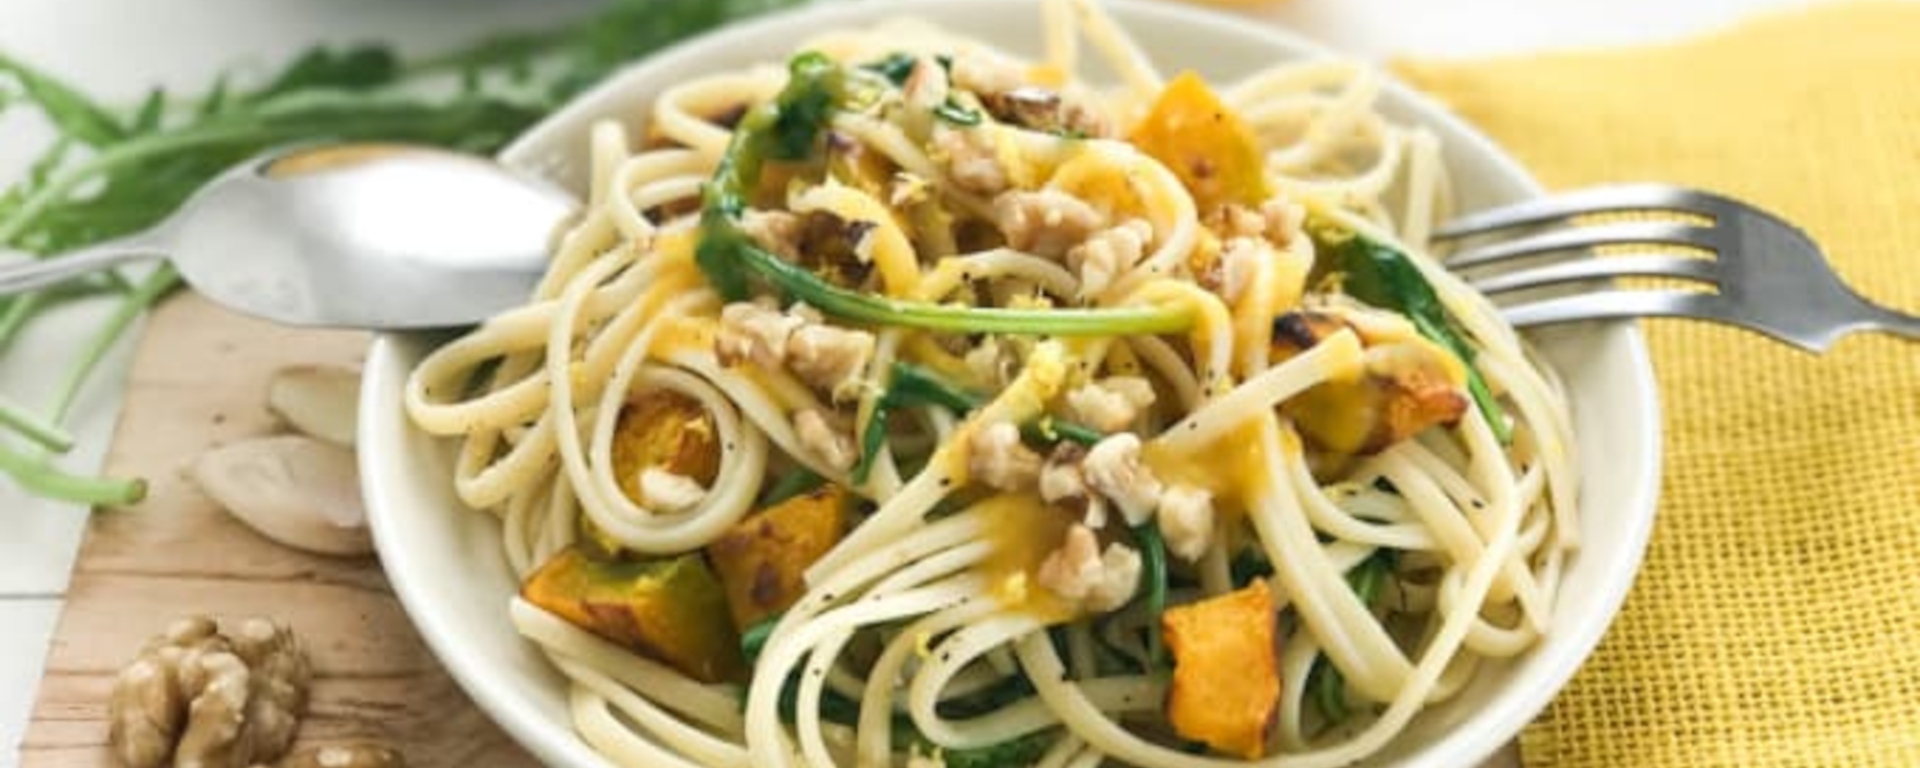 LuvMyRecipe.com - Linguine with Pumpkin, Rocket and Roasted Walnuts Featured